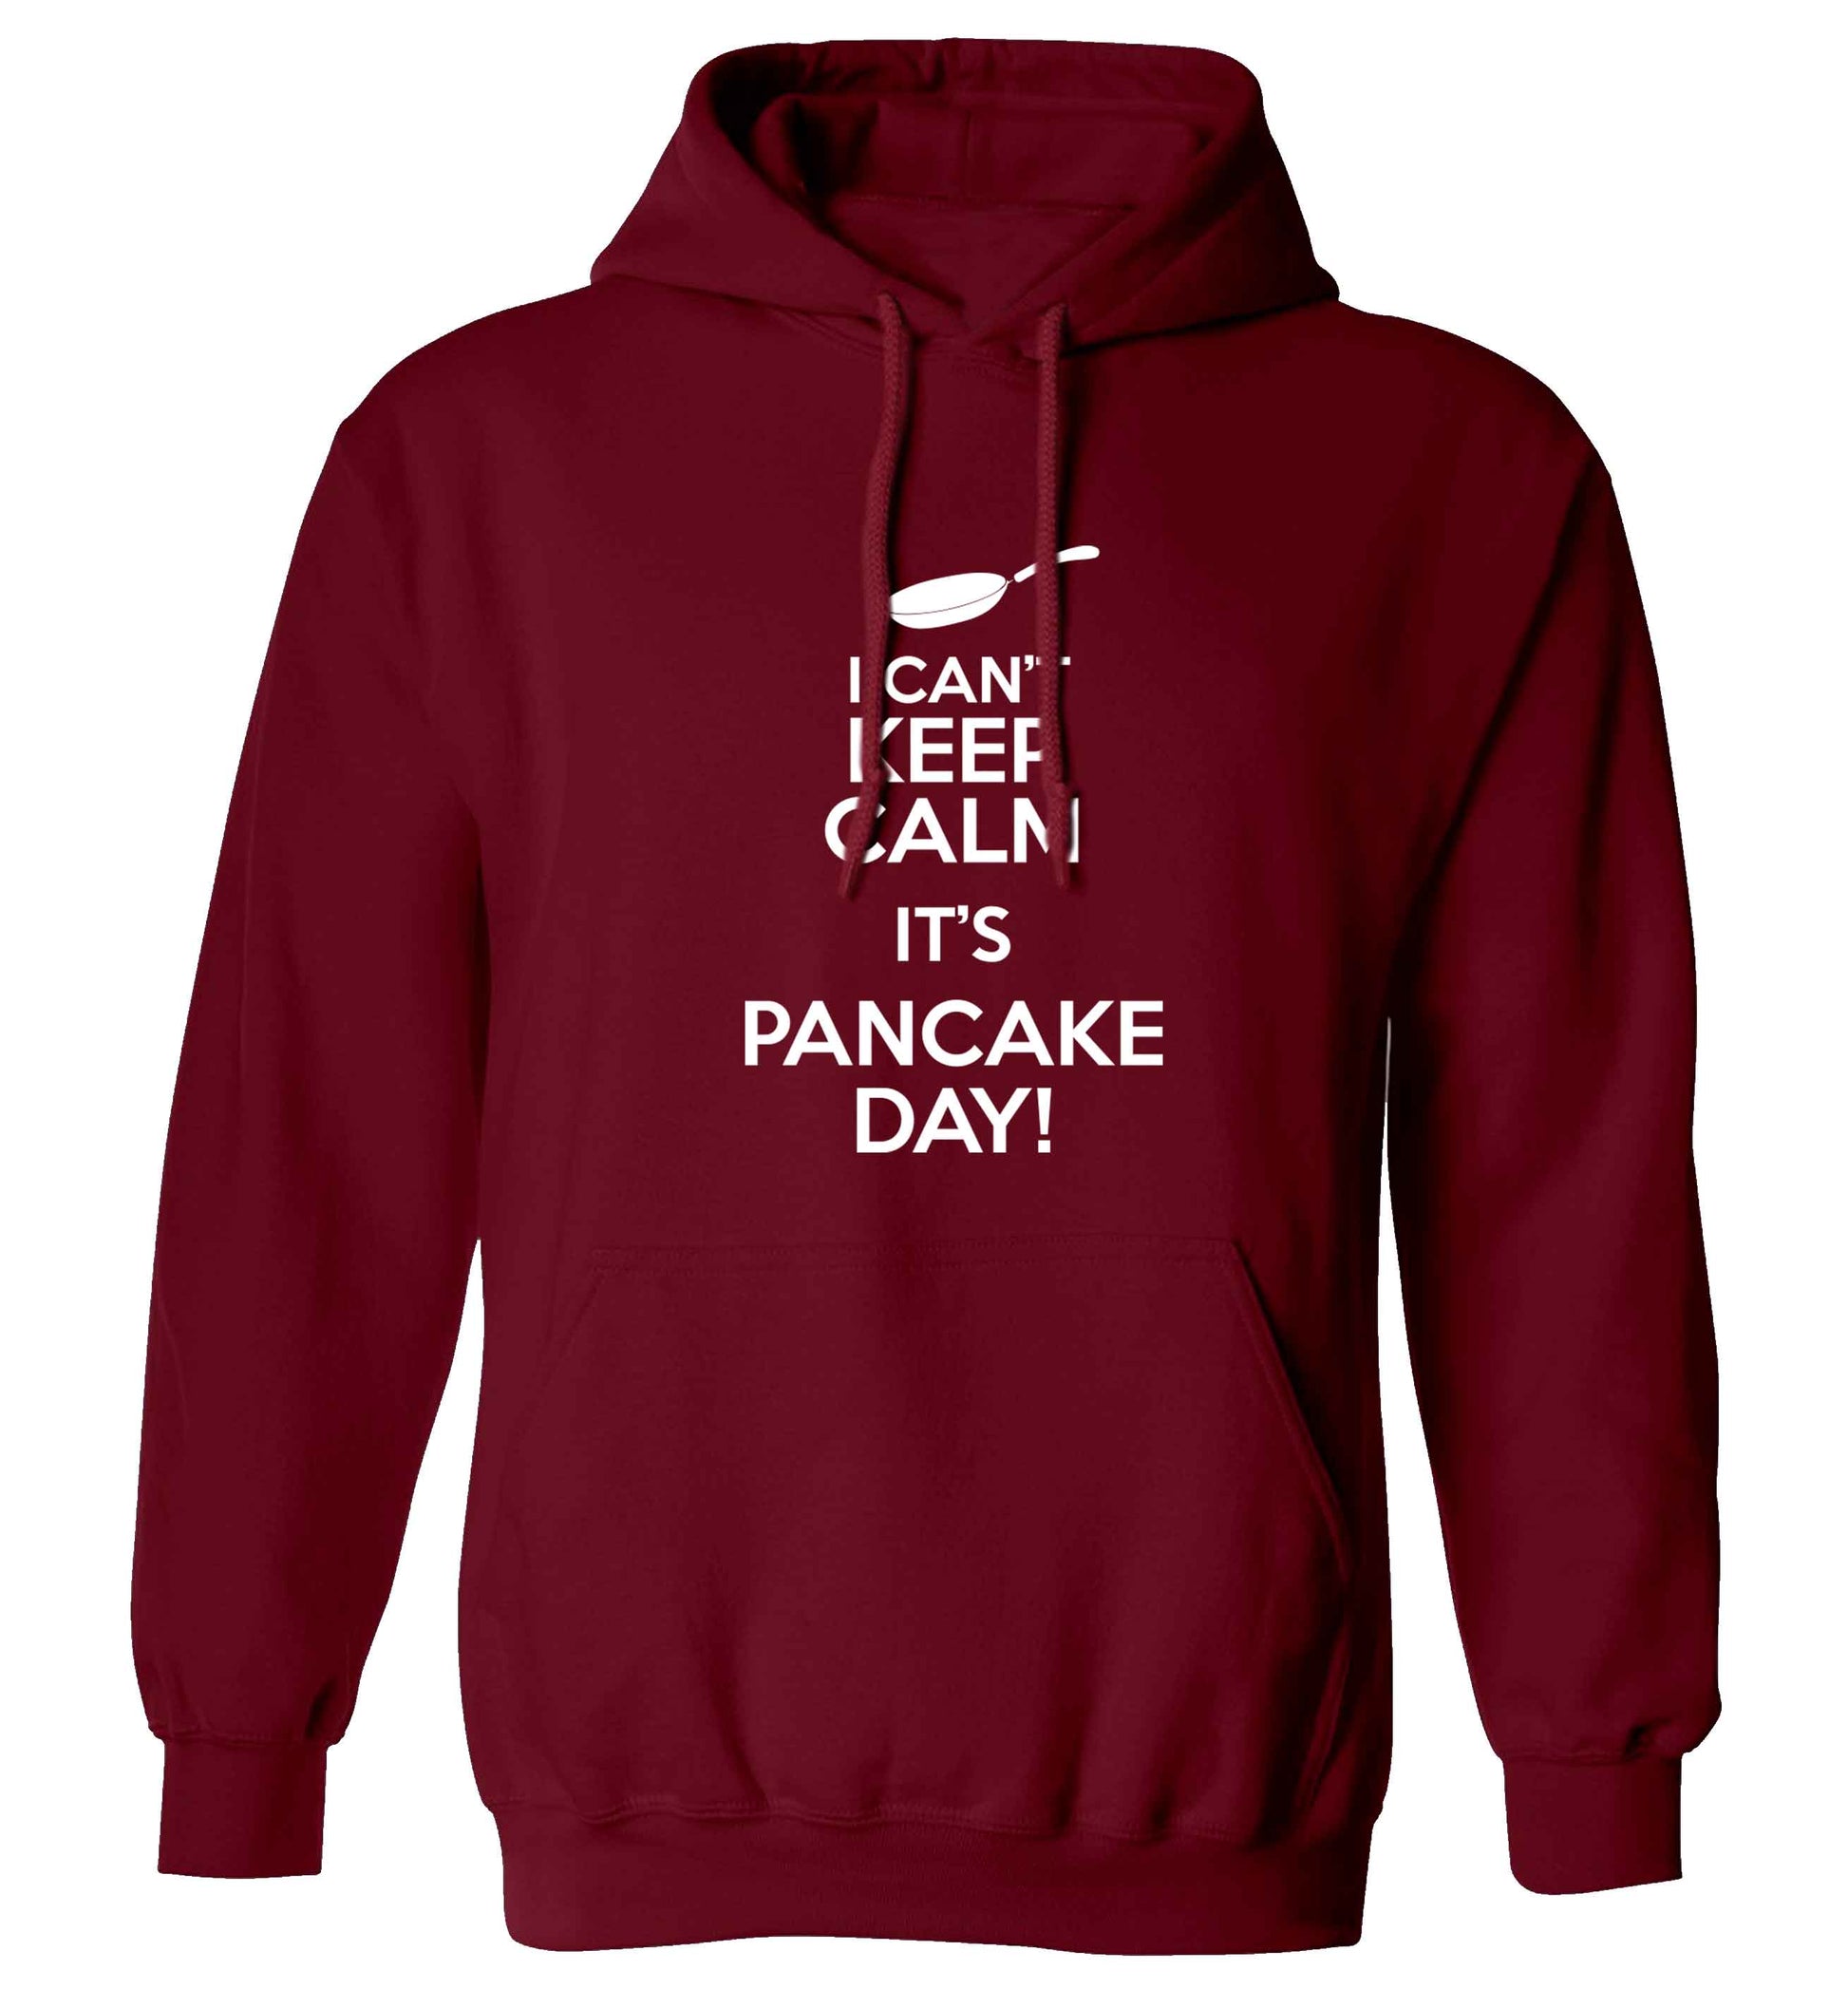 I can't keep calm it's pancake day! adults unisex maroon hoodie 2XL